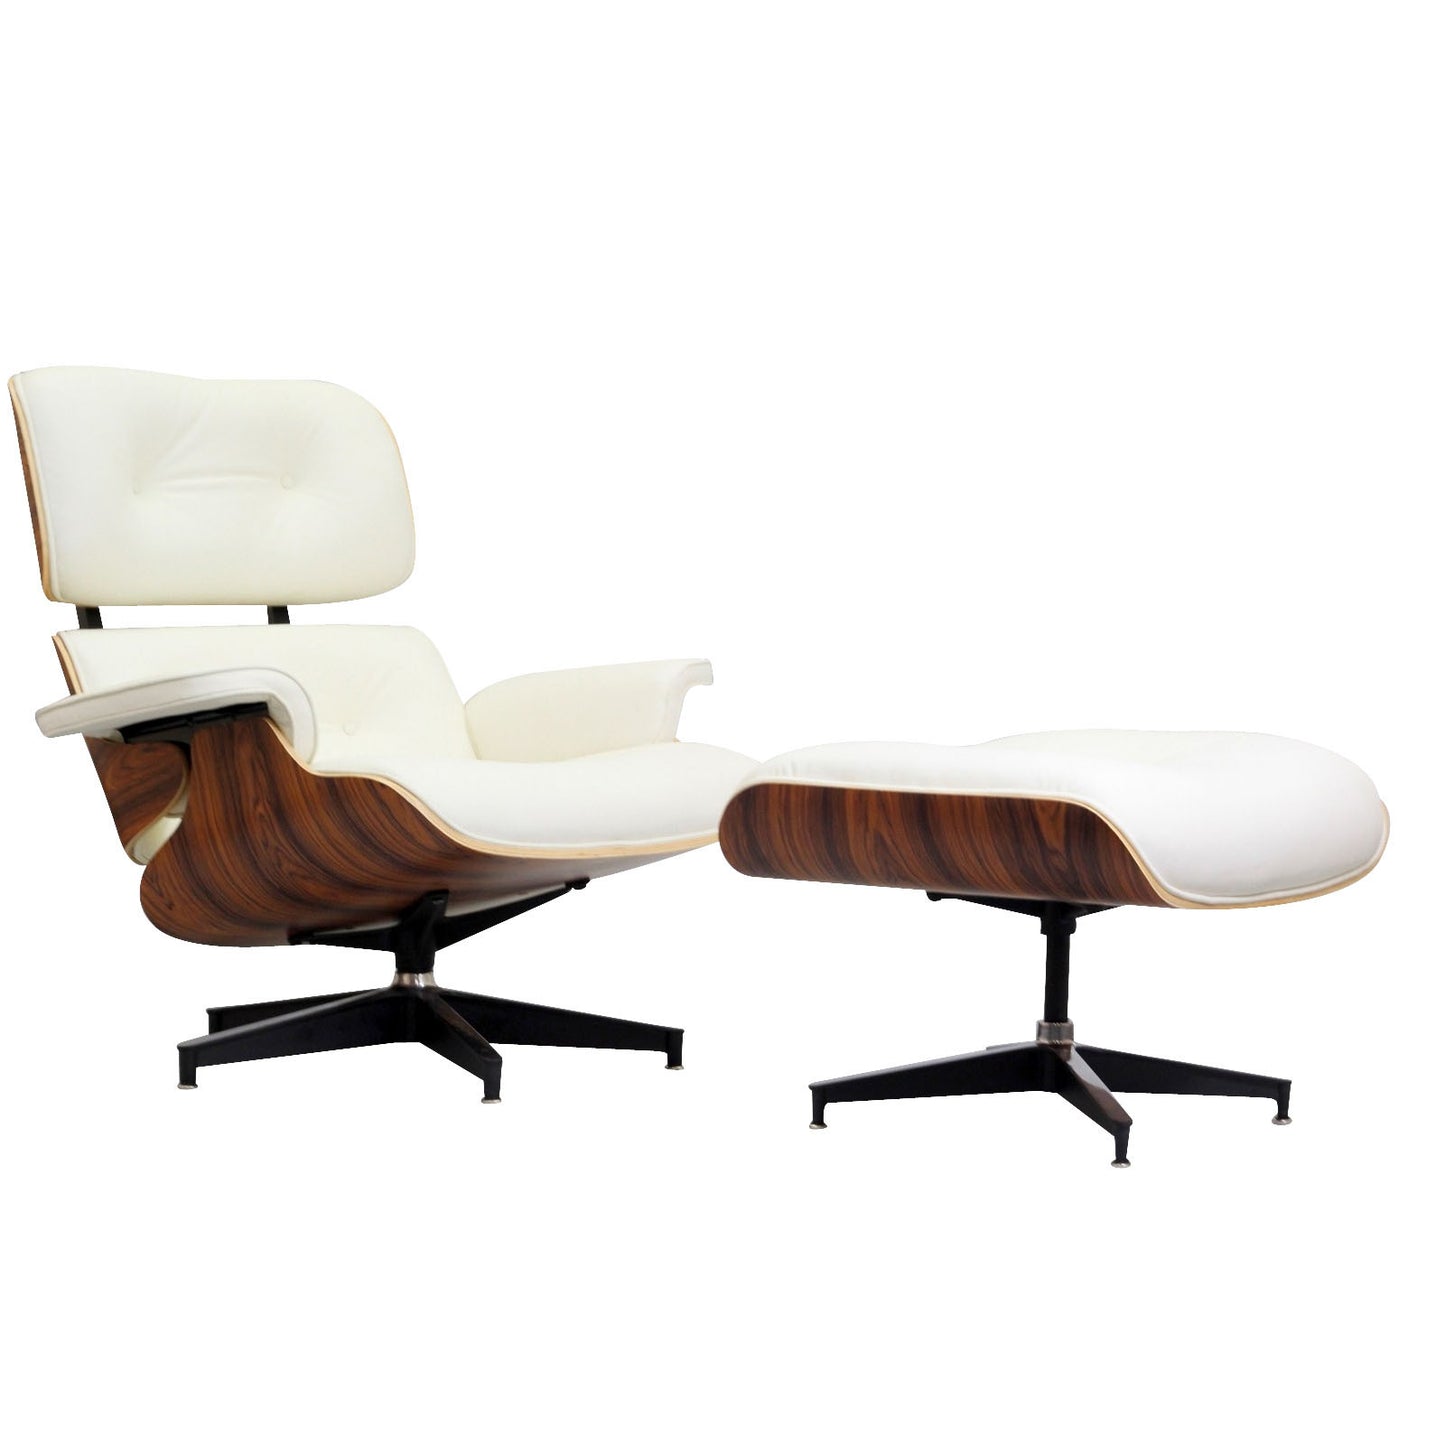 Eames Inspired Lounge Chair w/ Ottoman White RosewoodLounge Chair Kraft Interiors  White Rosewood   Four Hands, Burke Decor, Mid Century Modern Furniture, Old Bones Furniture Company, Old Bones Co, Modern Mid Century, Designer Furniture, https://www.oldbonesco.com/